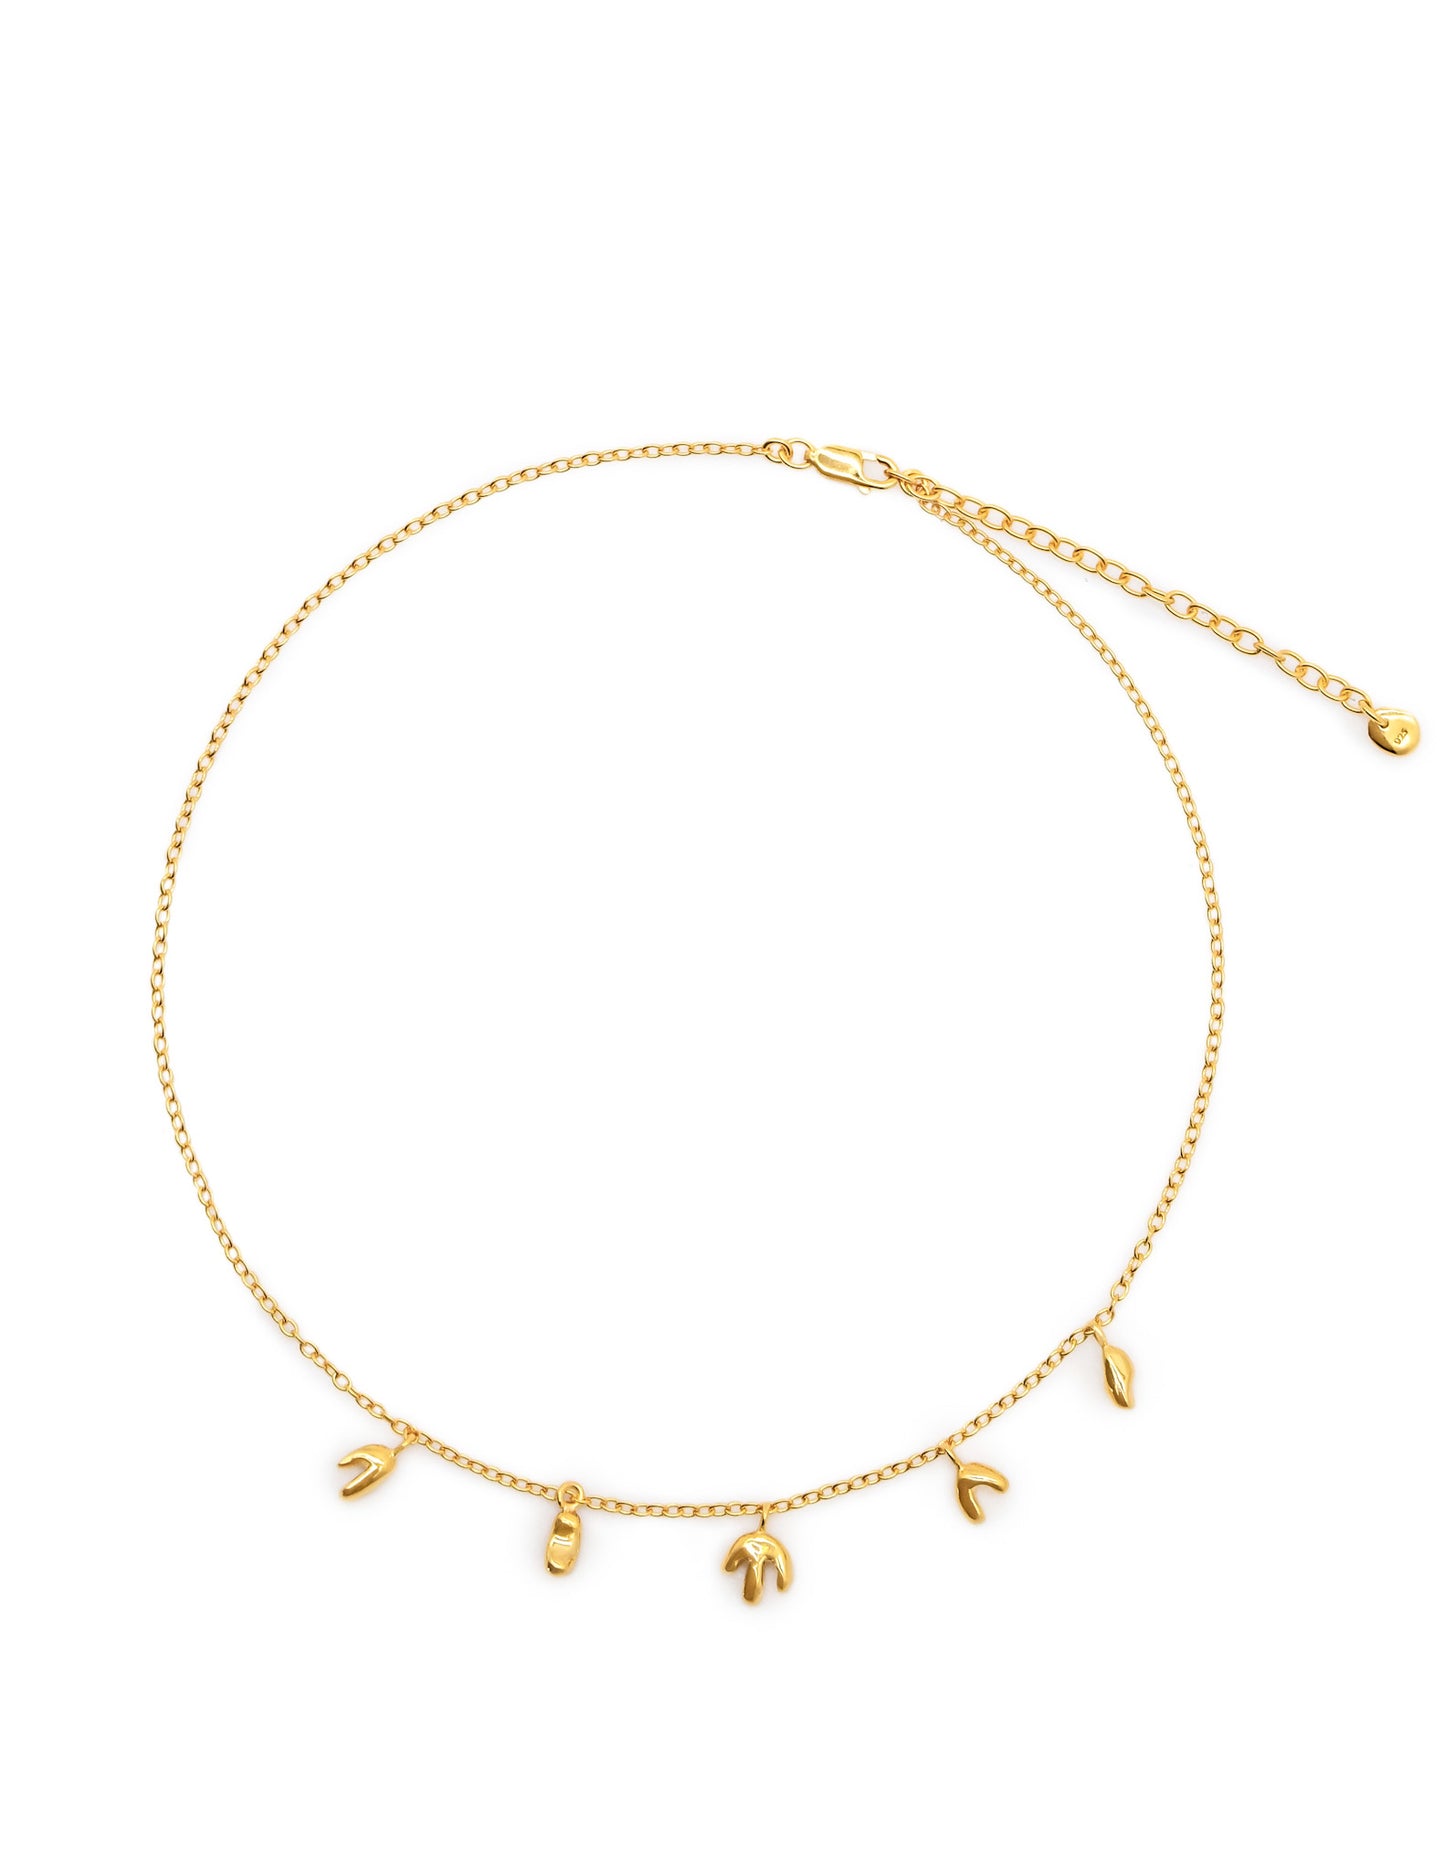 Kharys jewerly icicle charms organic shaped 18k gold vermeil necklace